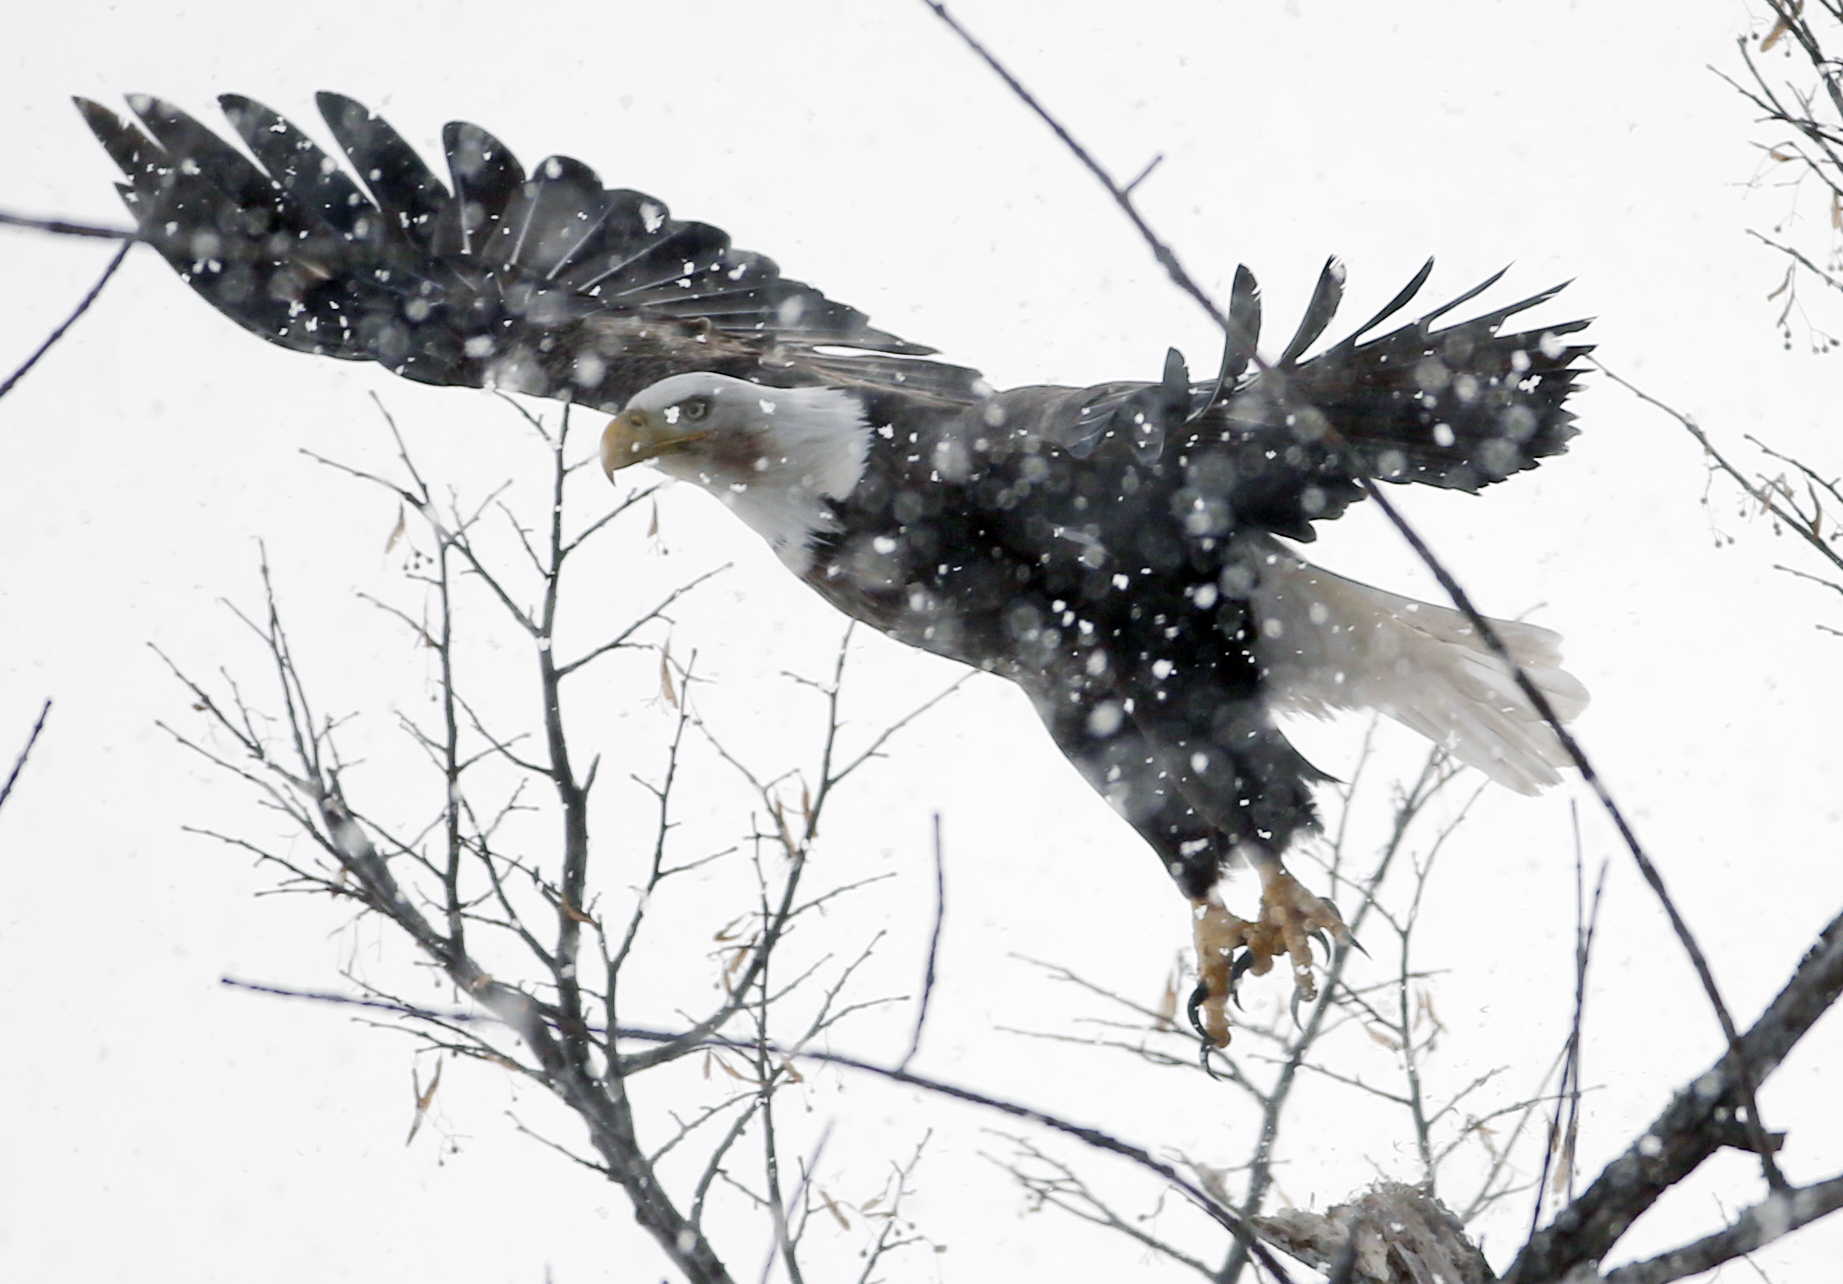 2 Bald Eagles Illegally Shot, Killed In Wisconsin